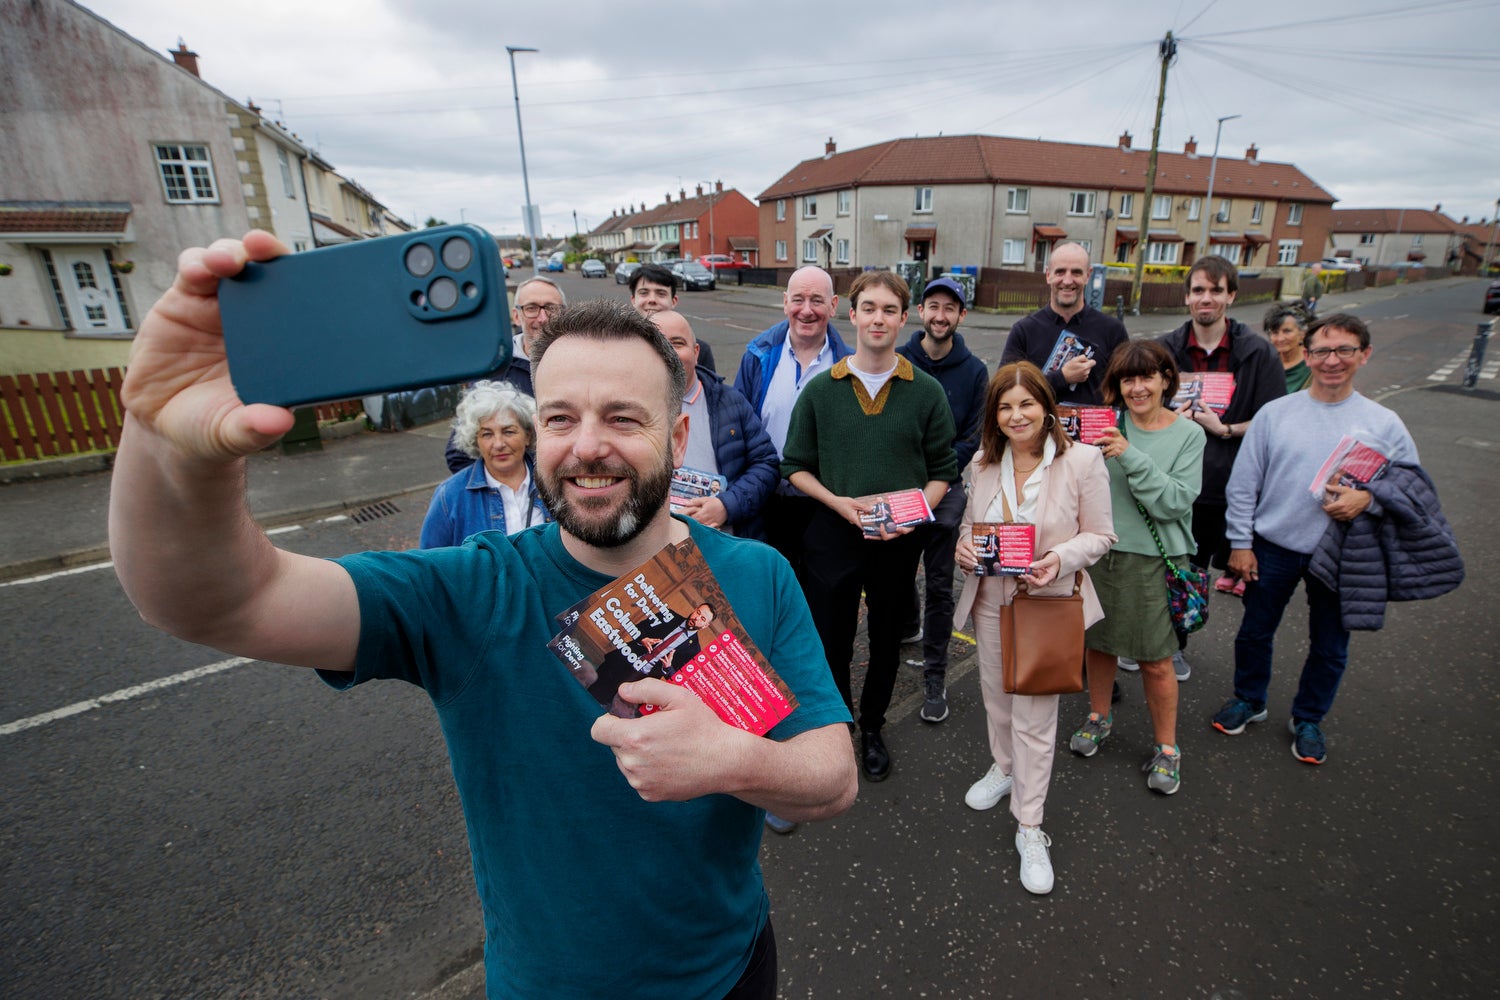 Colum Eastwood, SDLP leader and candidate for the party in the Westminster constituency of Foyle in Northern Ireland taking a selfie with his canvassing team in the Creggan area of Derry City. (Liam McBurney/PA)